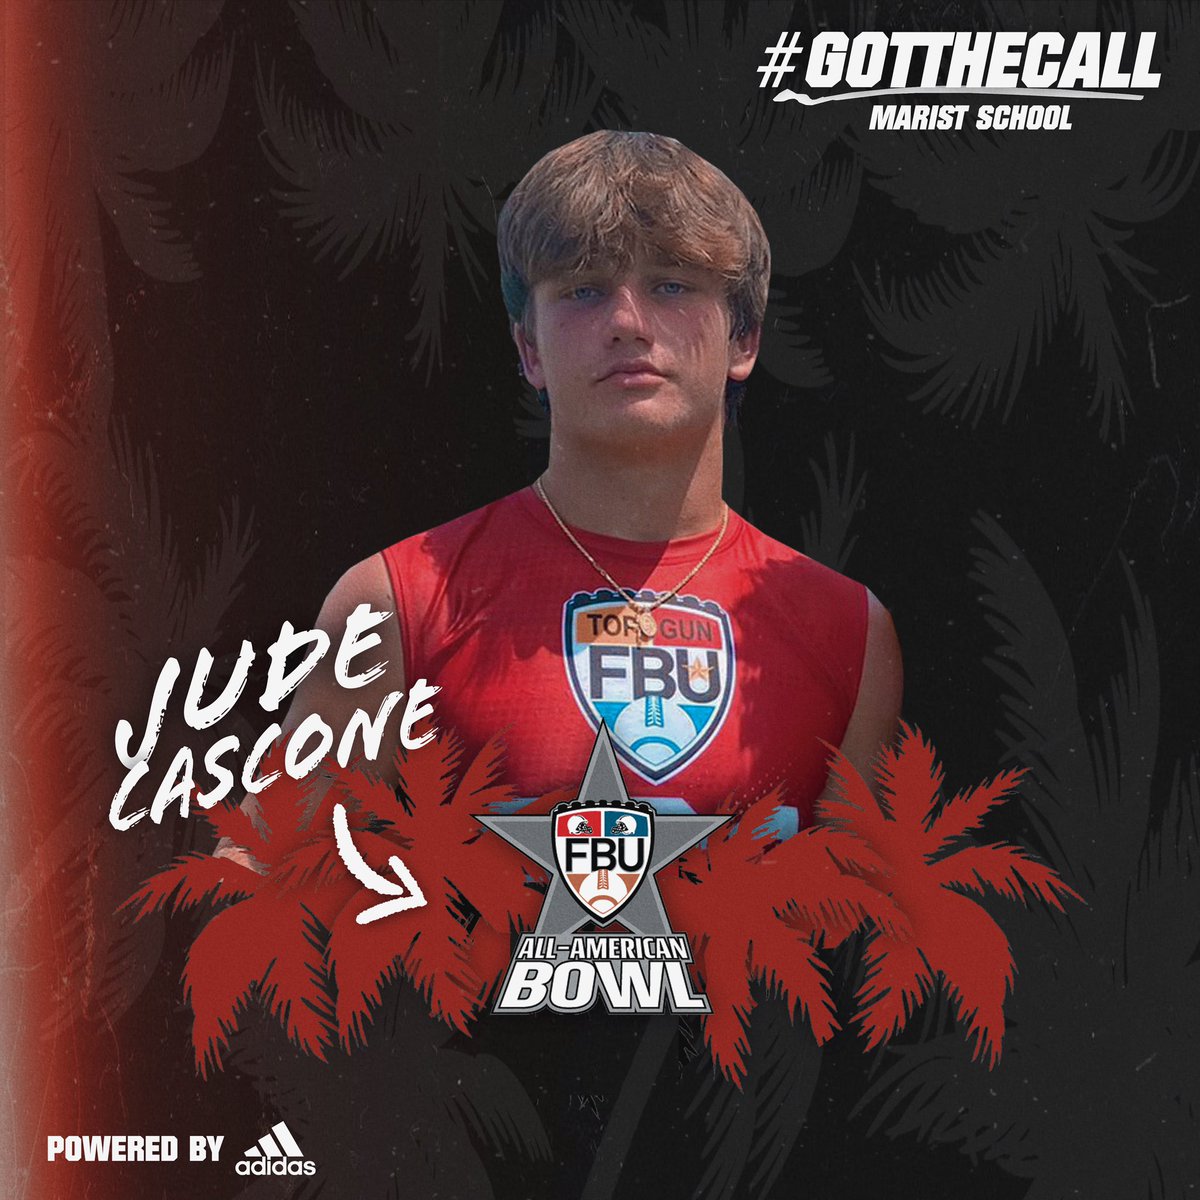 RING RING ☎️ @JudeCascone answered the call. See you in December. Welcome to the ELITE ✅ #FBUAllAmerican #FBU #GetBetterHere